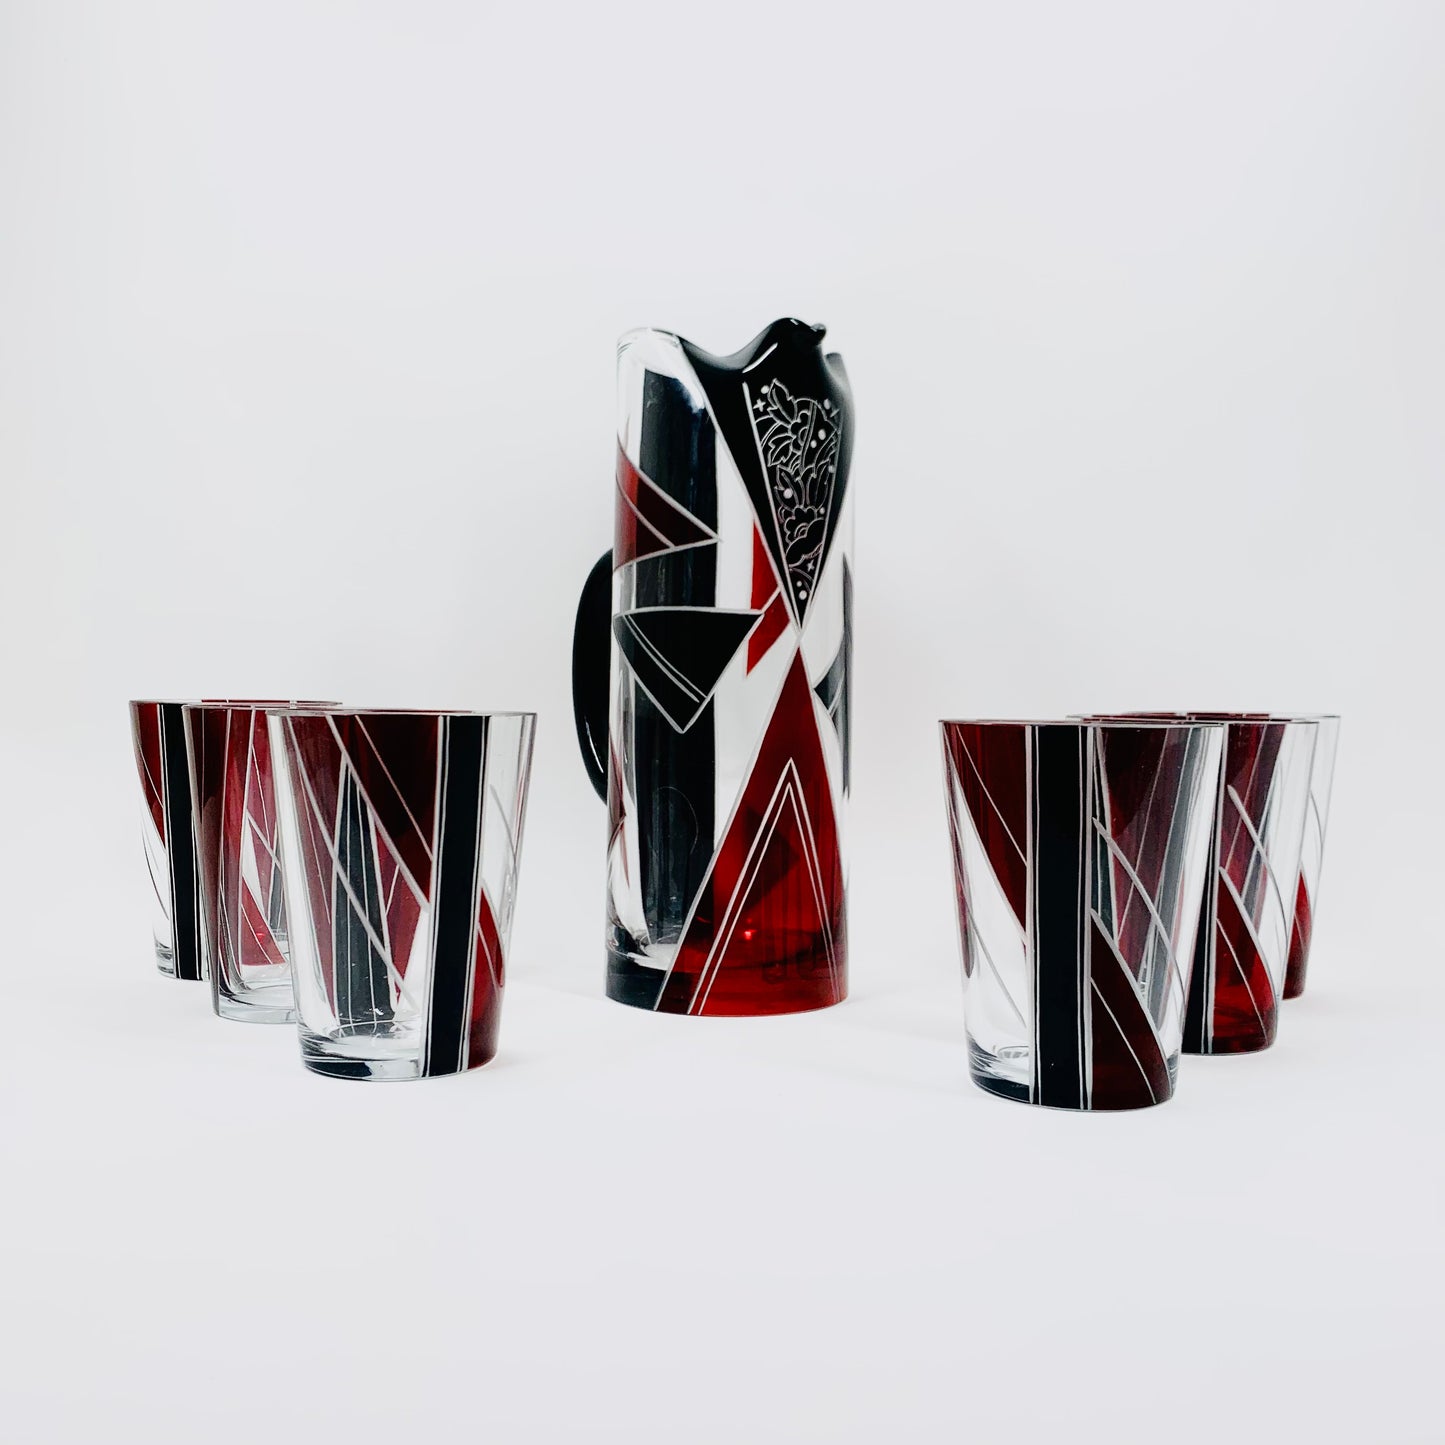 Extremely extremely rare antique Art Deco ruby and black enamel jug and matching glasses set by Karl Palda